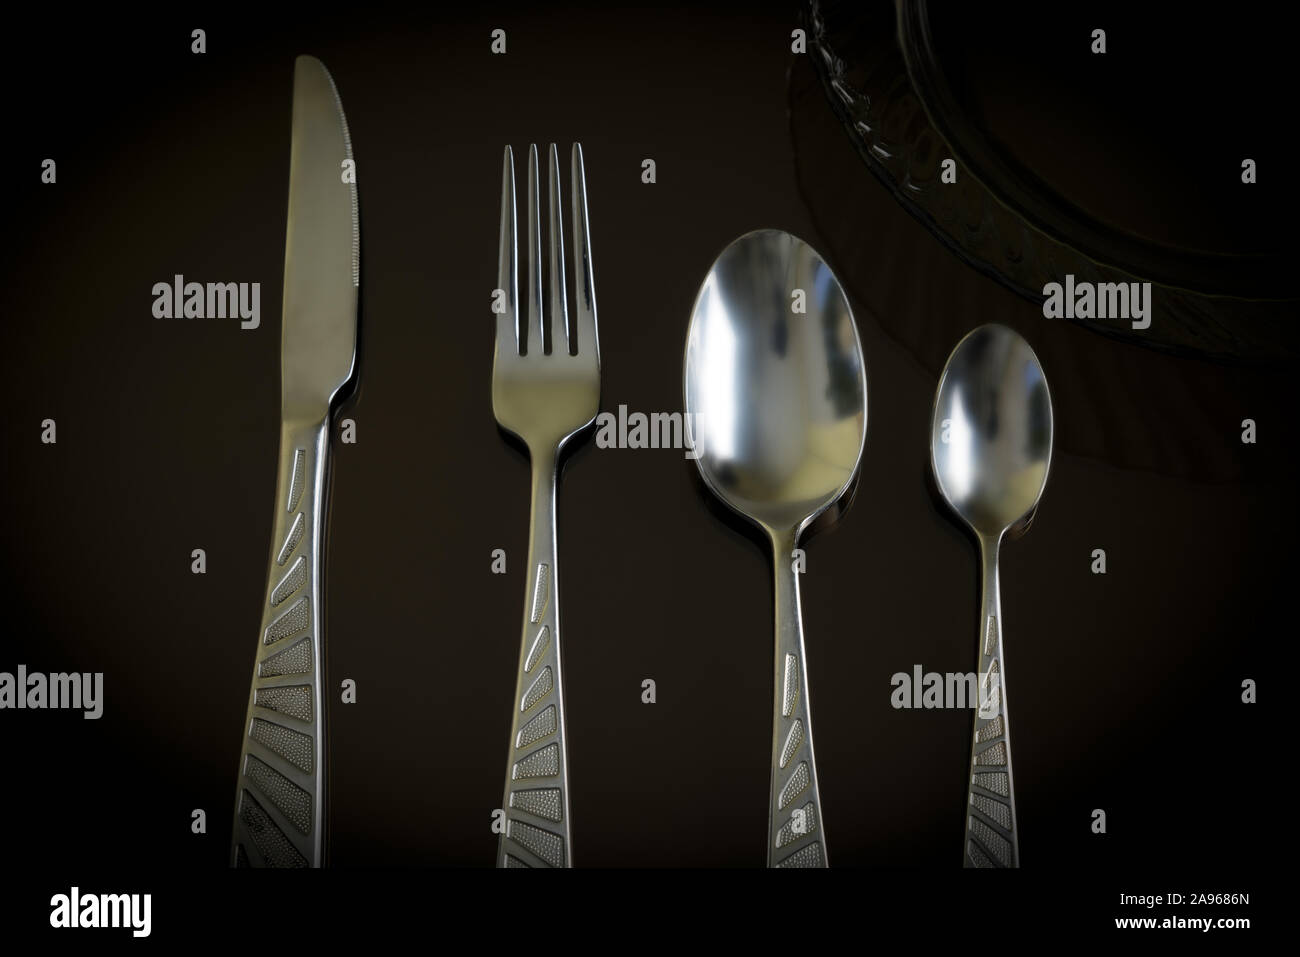 Still life of the kitchen objects. Dark glass plate, silver knife, fork, spoon, teaspoon on the dark reflective backdrop. Stock Photo